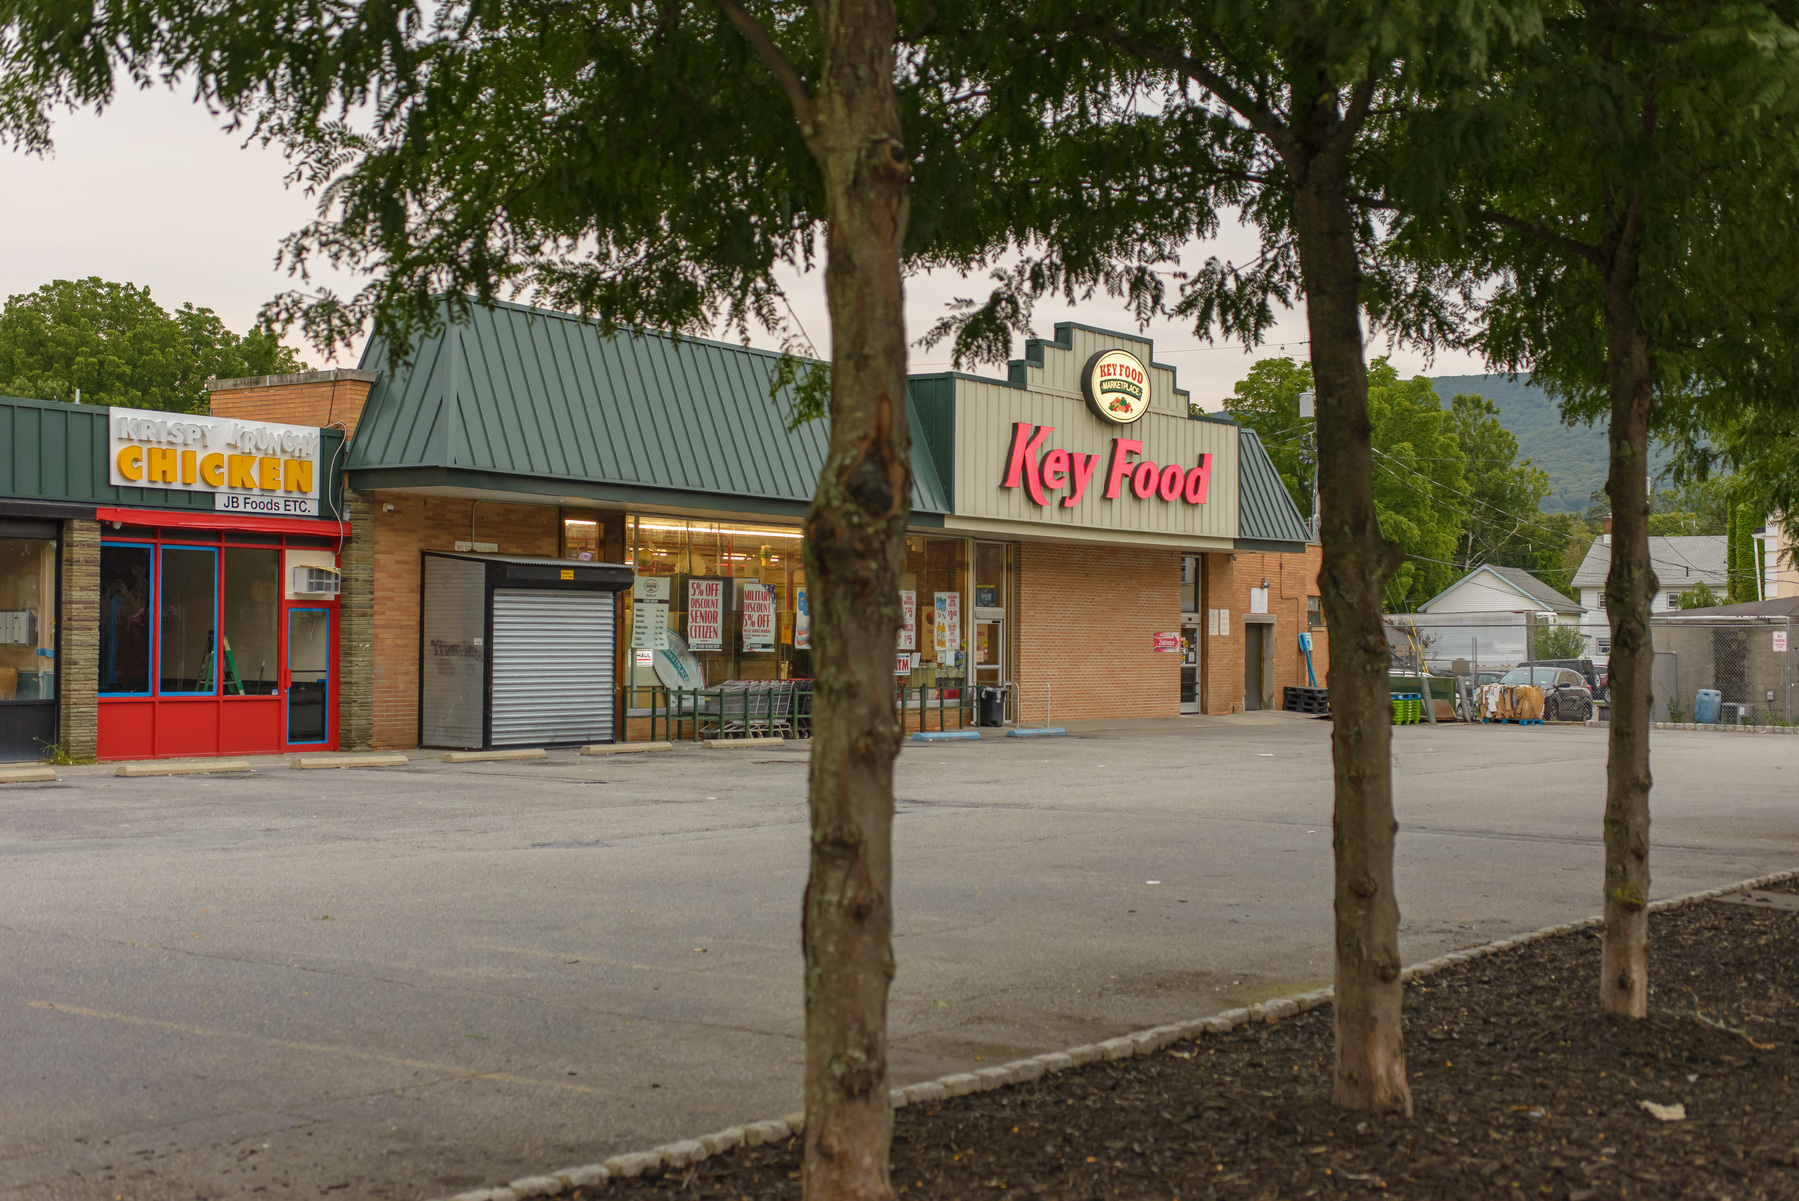 Key Food grocery store across parking lot , tree trunks in the foreground